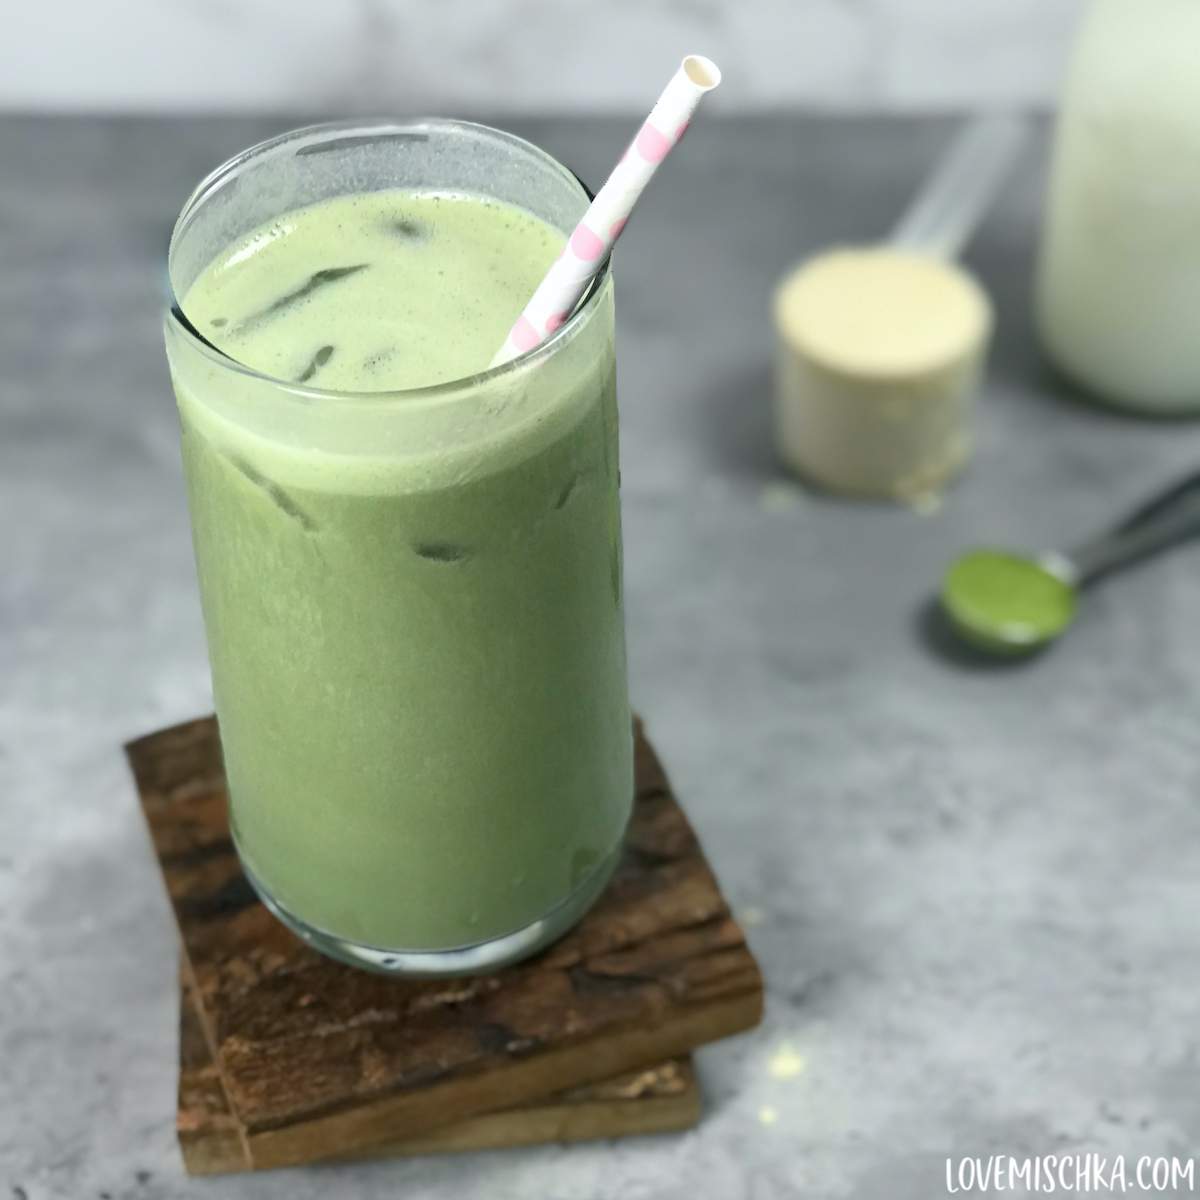 Creamy, green matcha protein shake sits in a tall glass with ice cubes and a white and light pink polka dot paper straw.